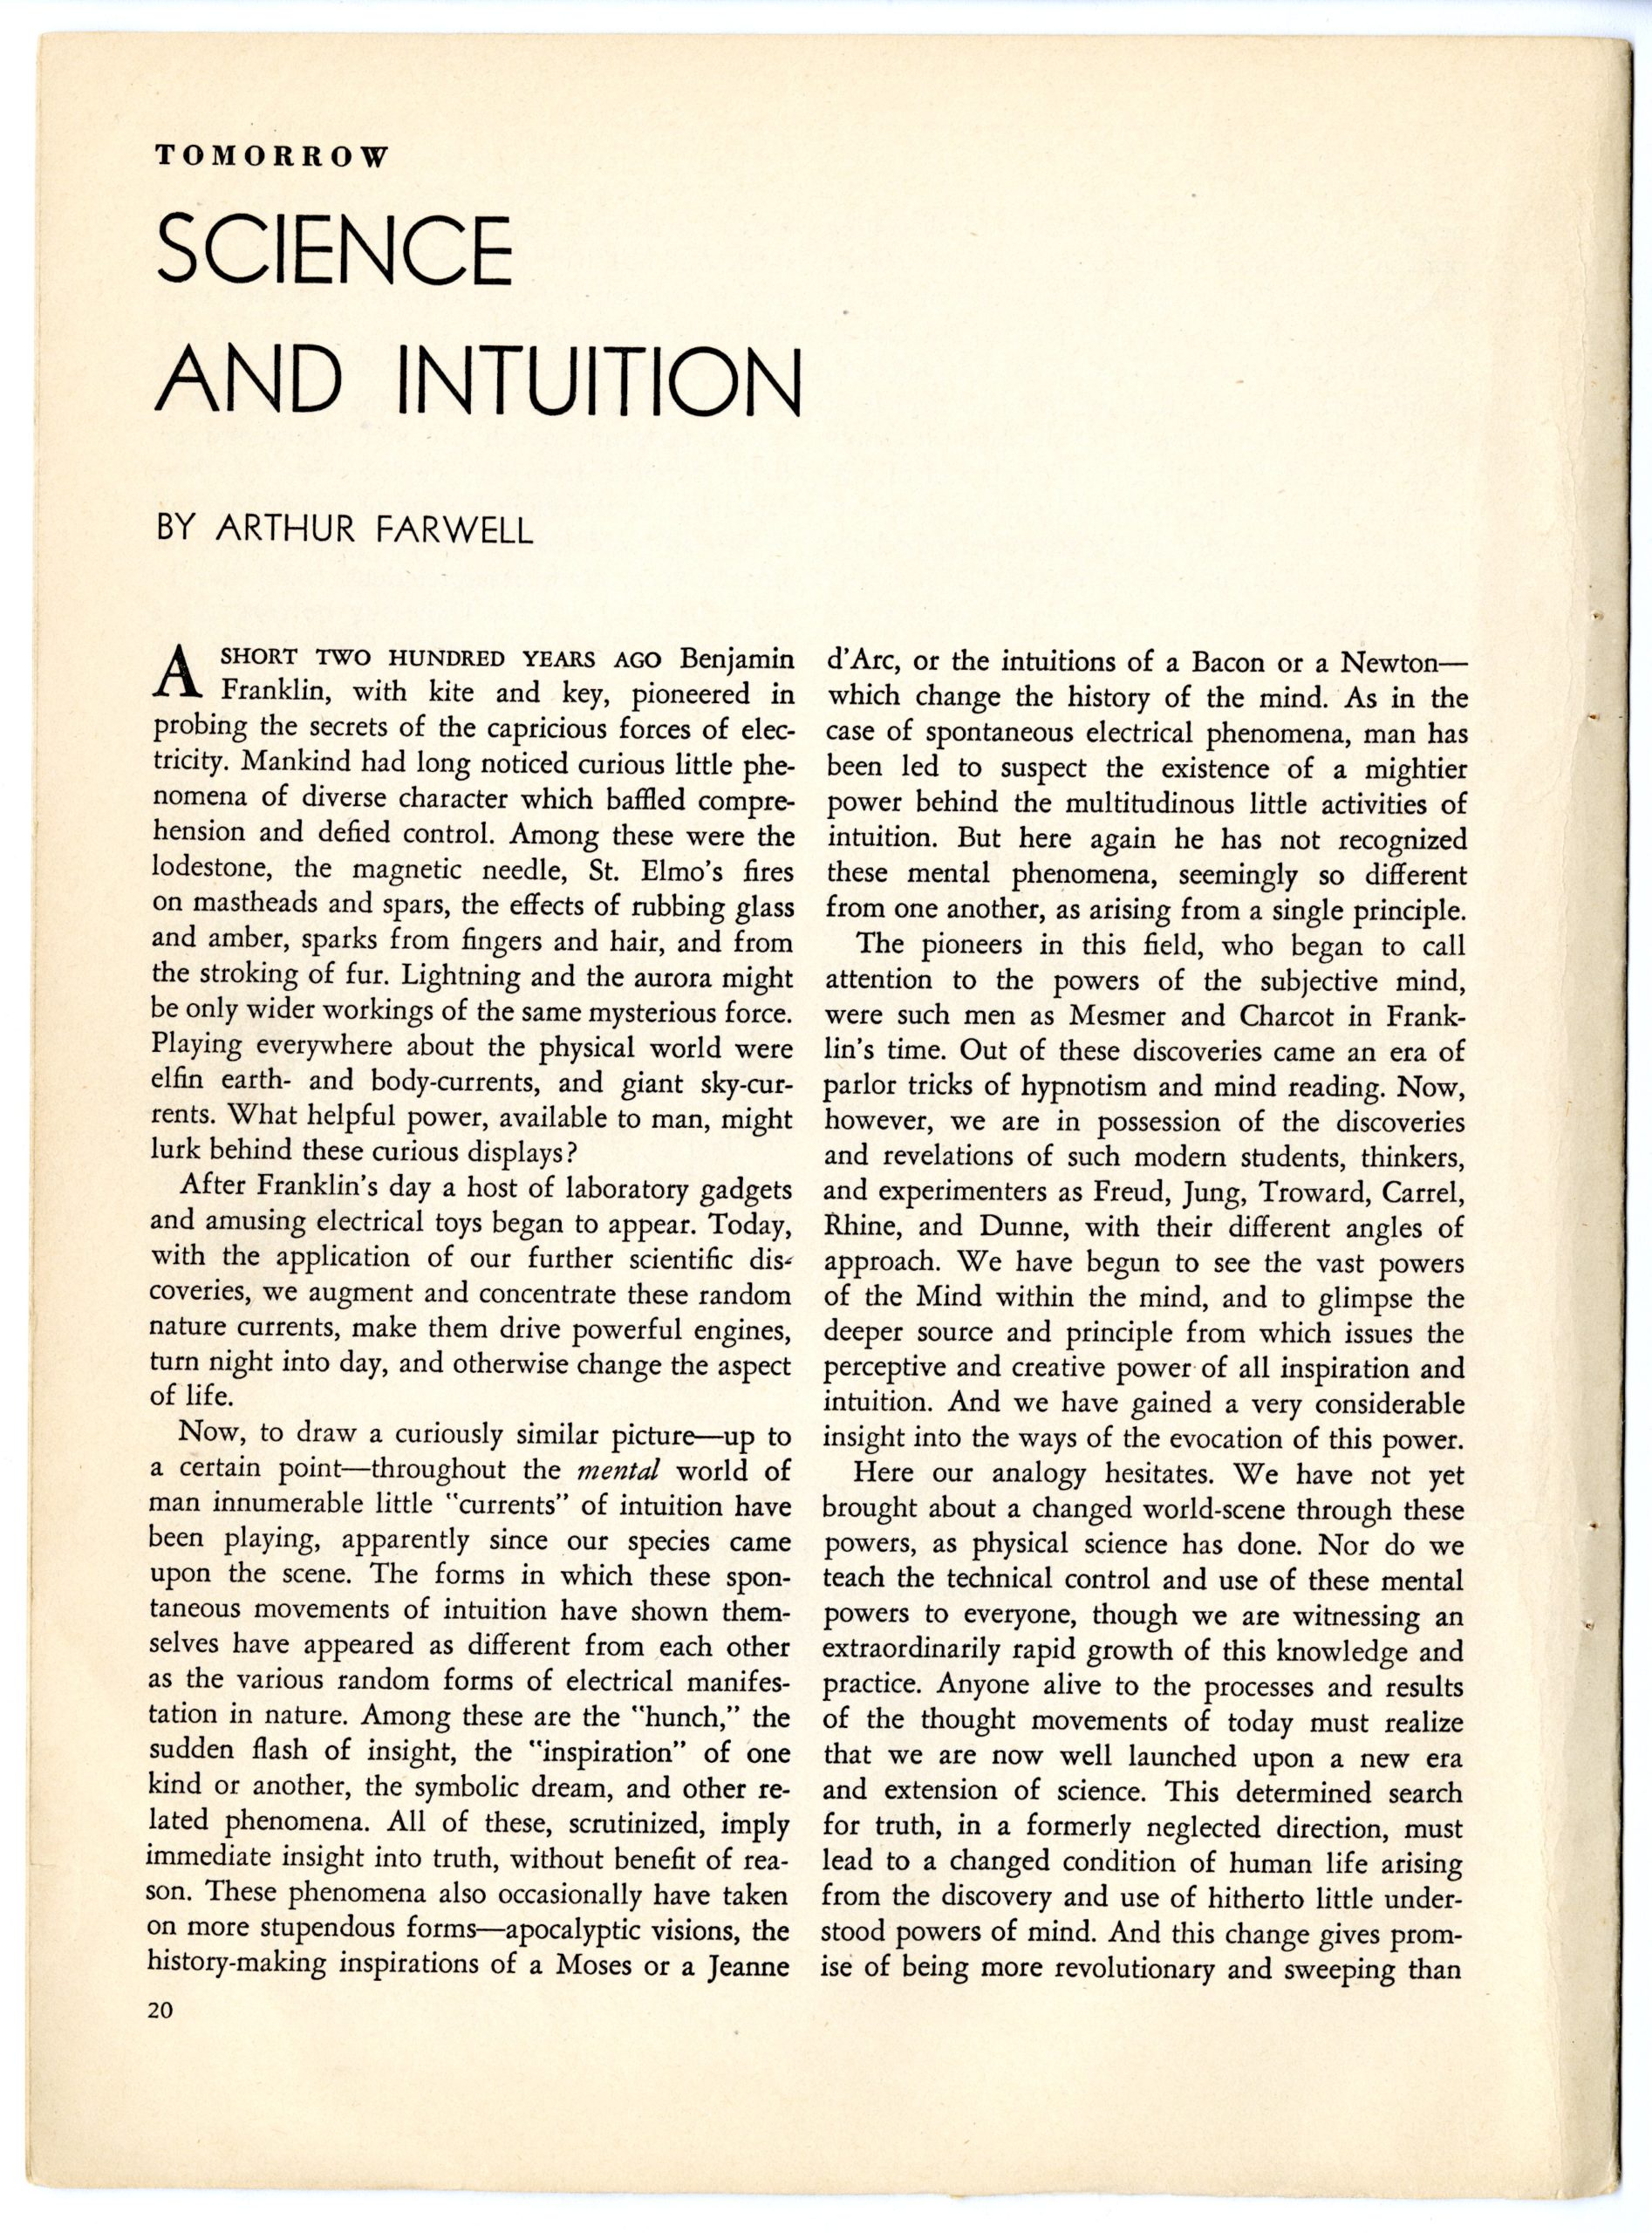 Science and Intuition article, page 1.